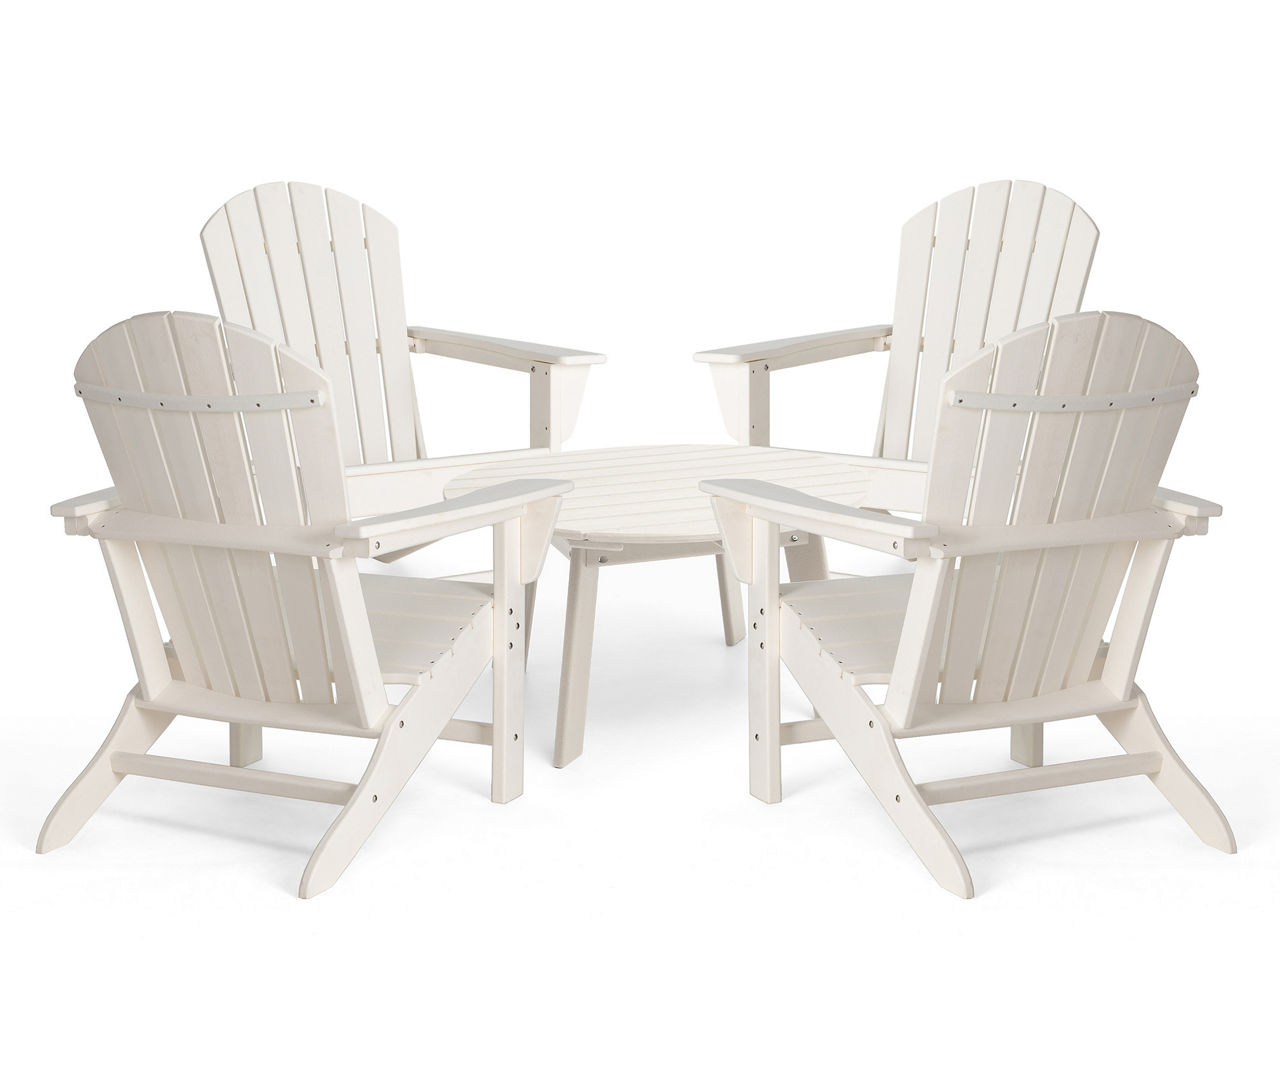 5-Piece Outdoor Patio White HDPE Adirondack Chair and Coffee Table Set1pc 36"D Coffee Table4pcs Adirondack Chairs (KD)